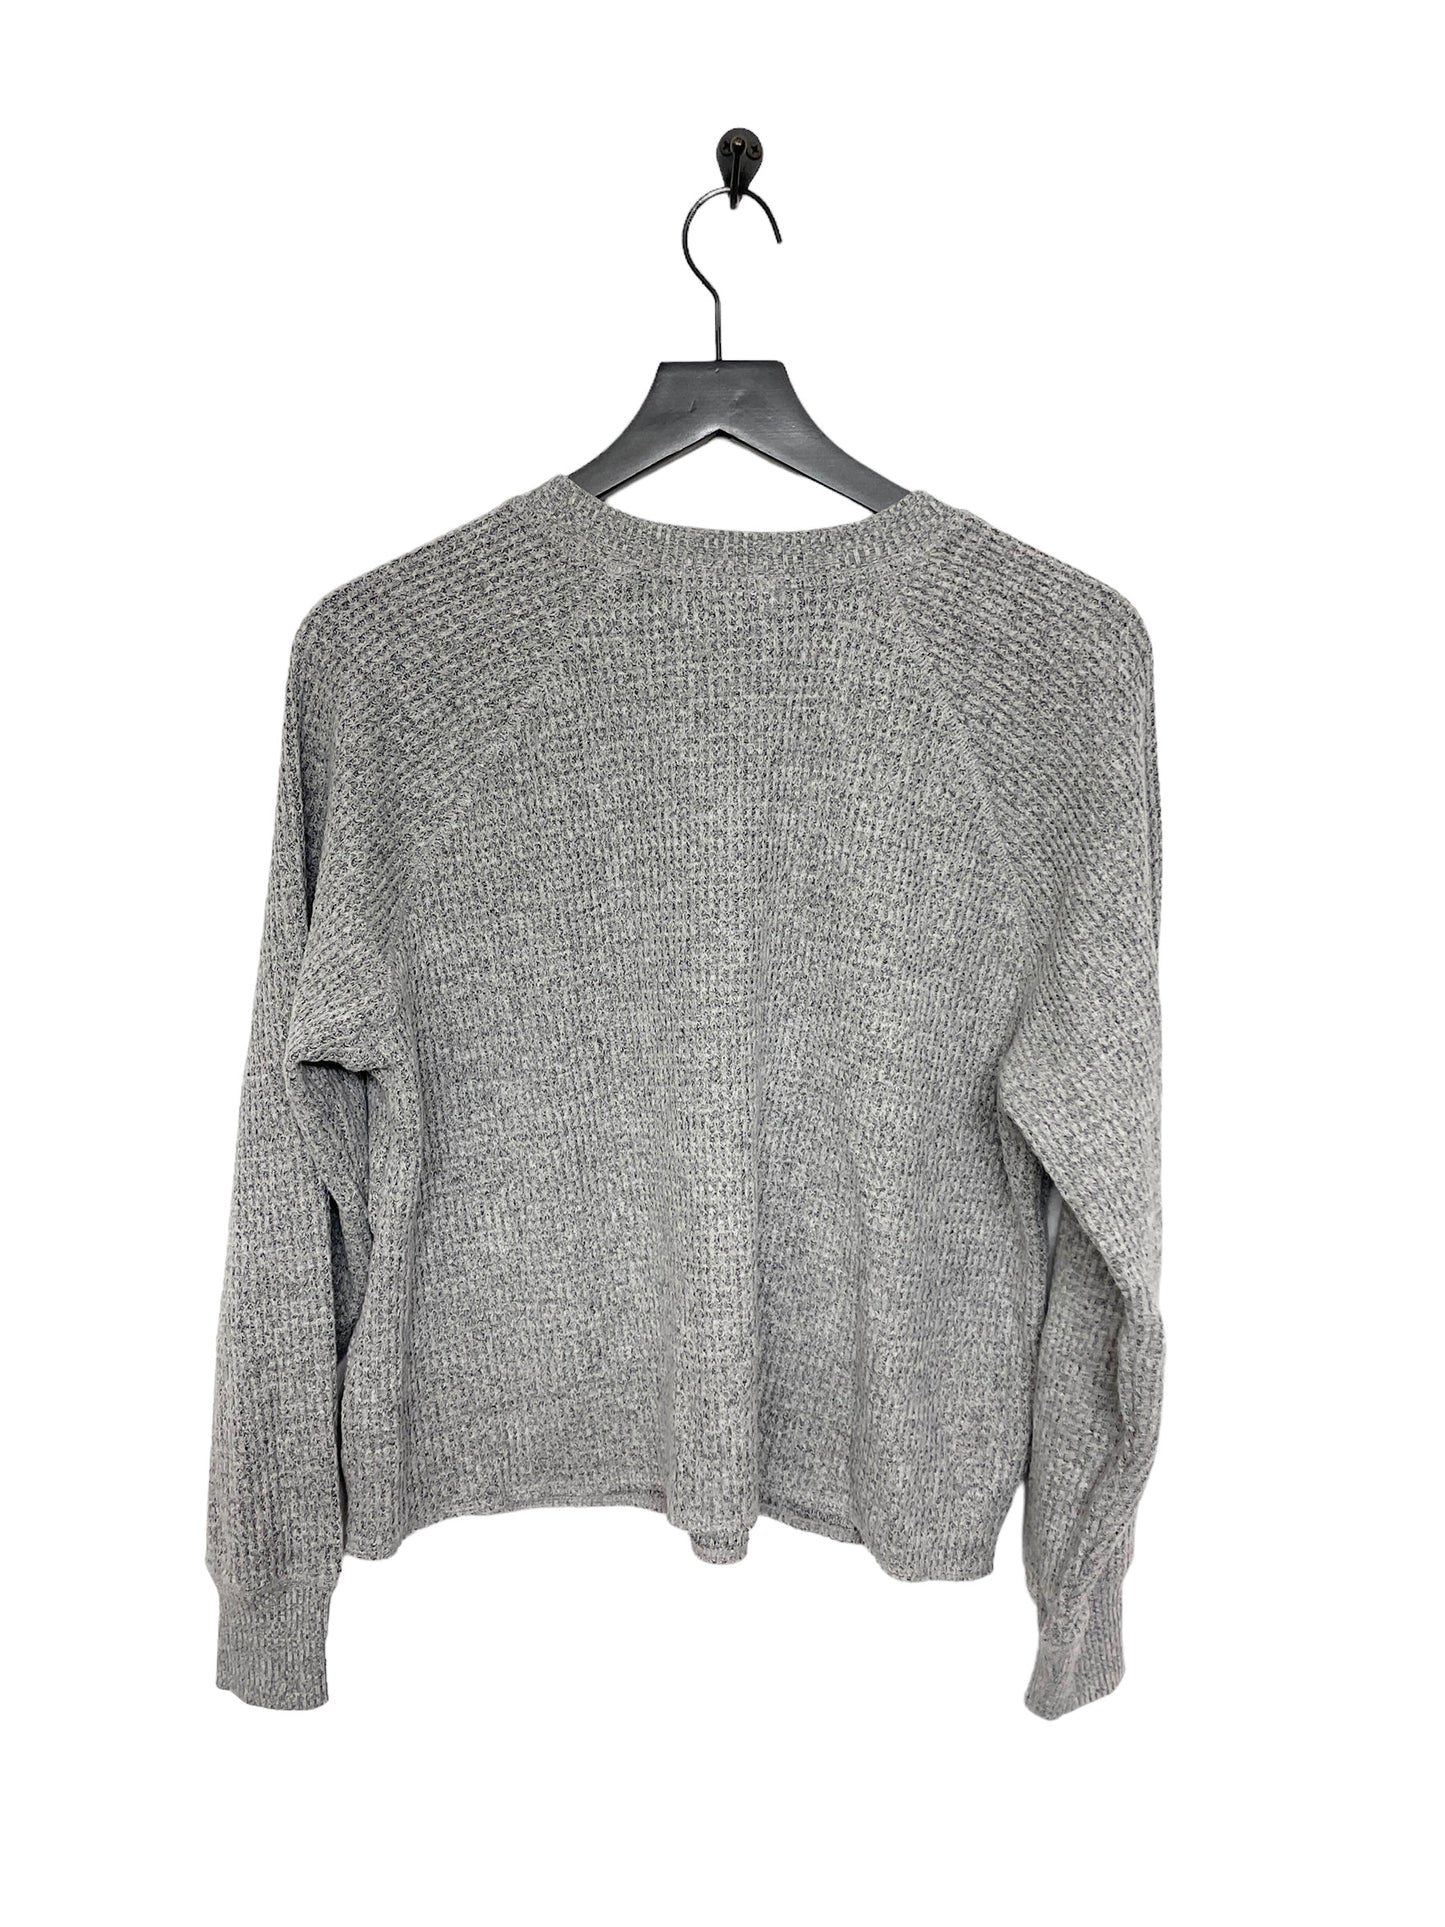 Grey Top Long Sleeve Basic Old Navy, Size M